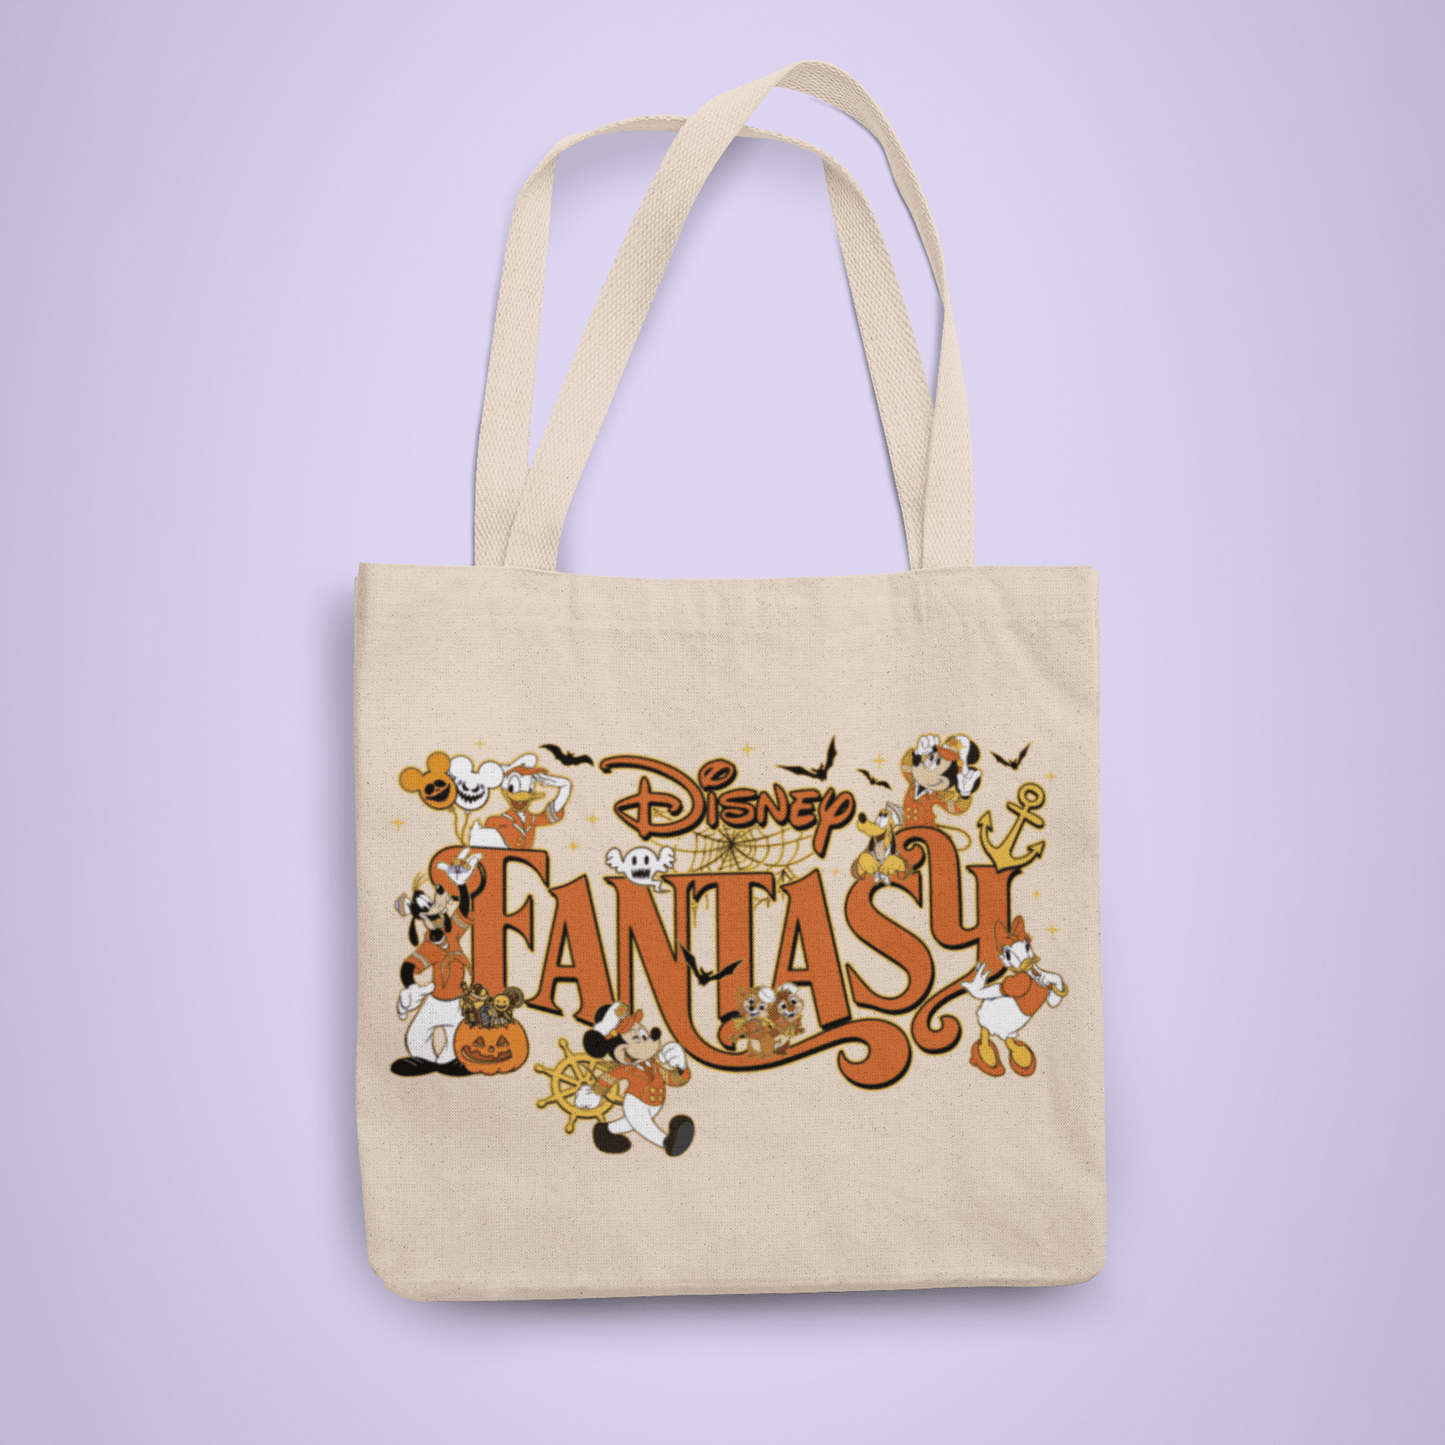 Disney Cruise Line Personalized Halloween Trick or Treat Tote Bag - Fantasy - Two Crafty Gays